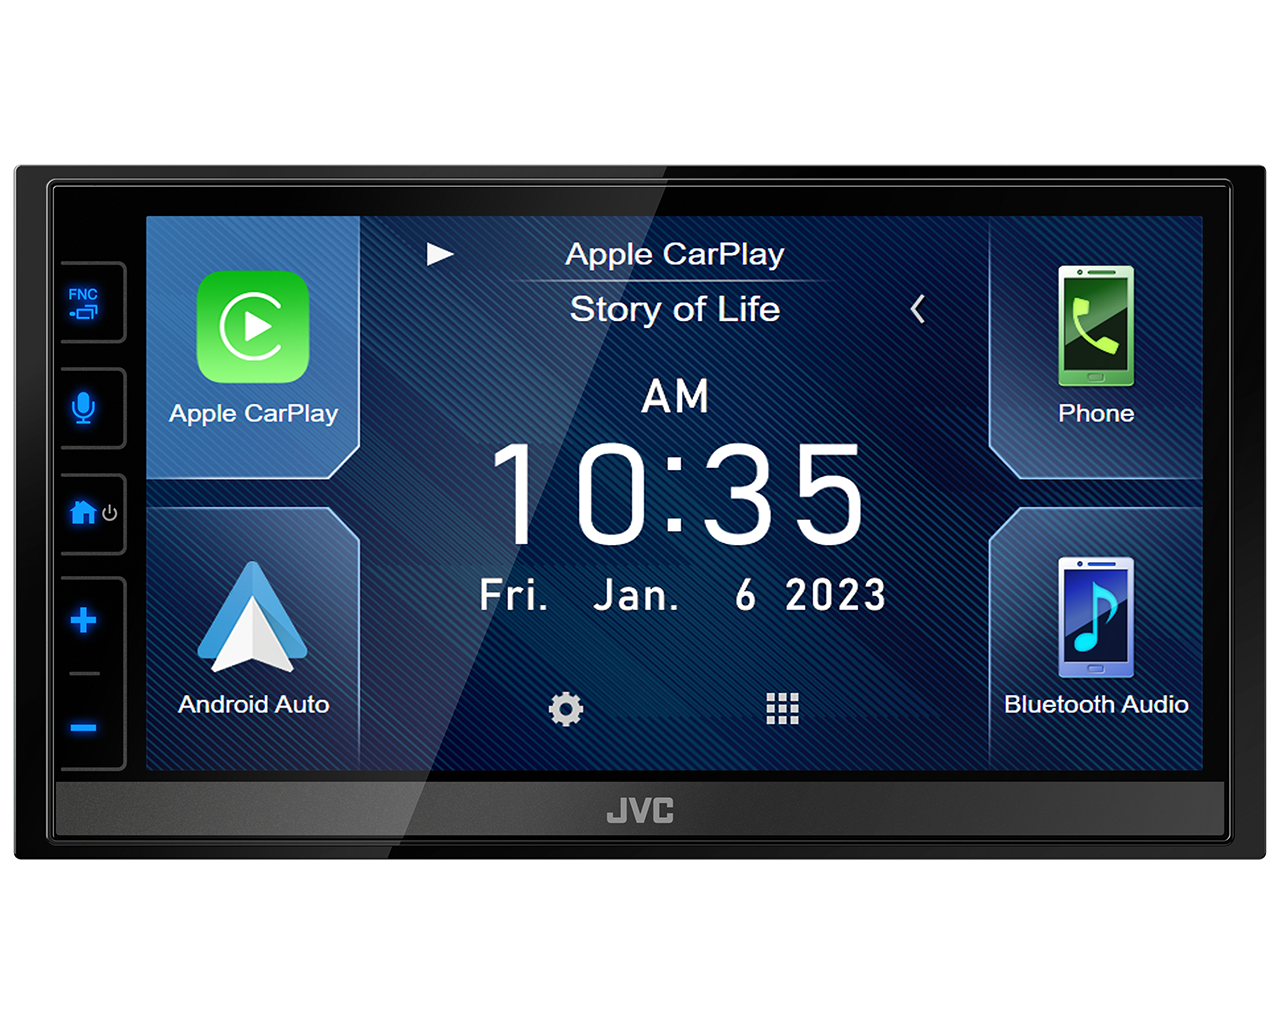 JVC KW-M780BT Digital Media Receiver featuring 6.8-inch Capacitive Touch Control Monitor